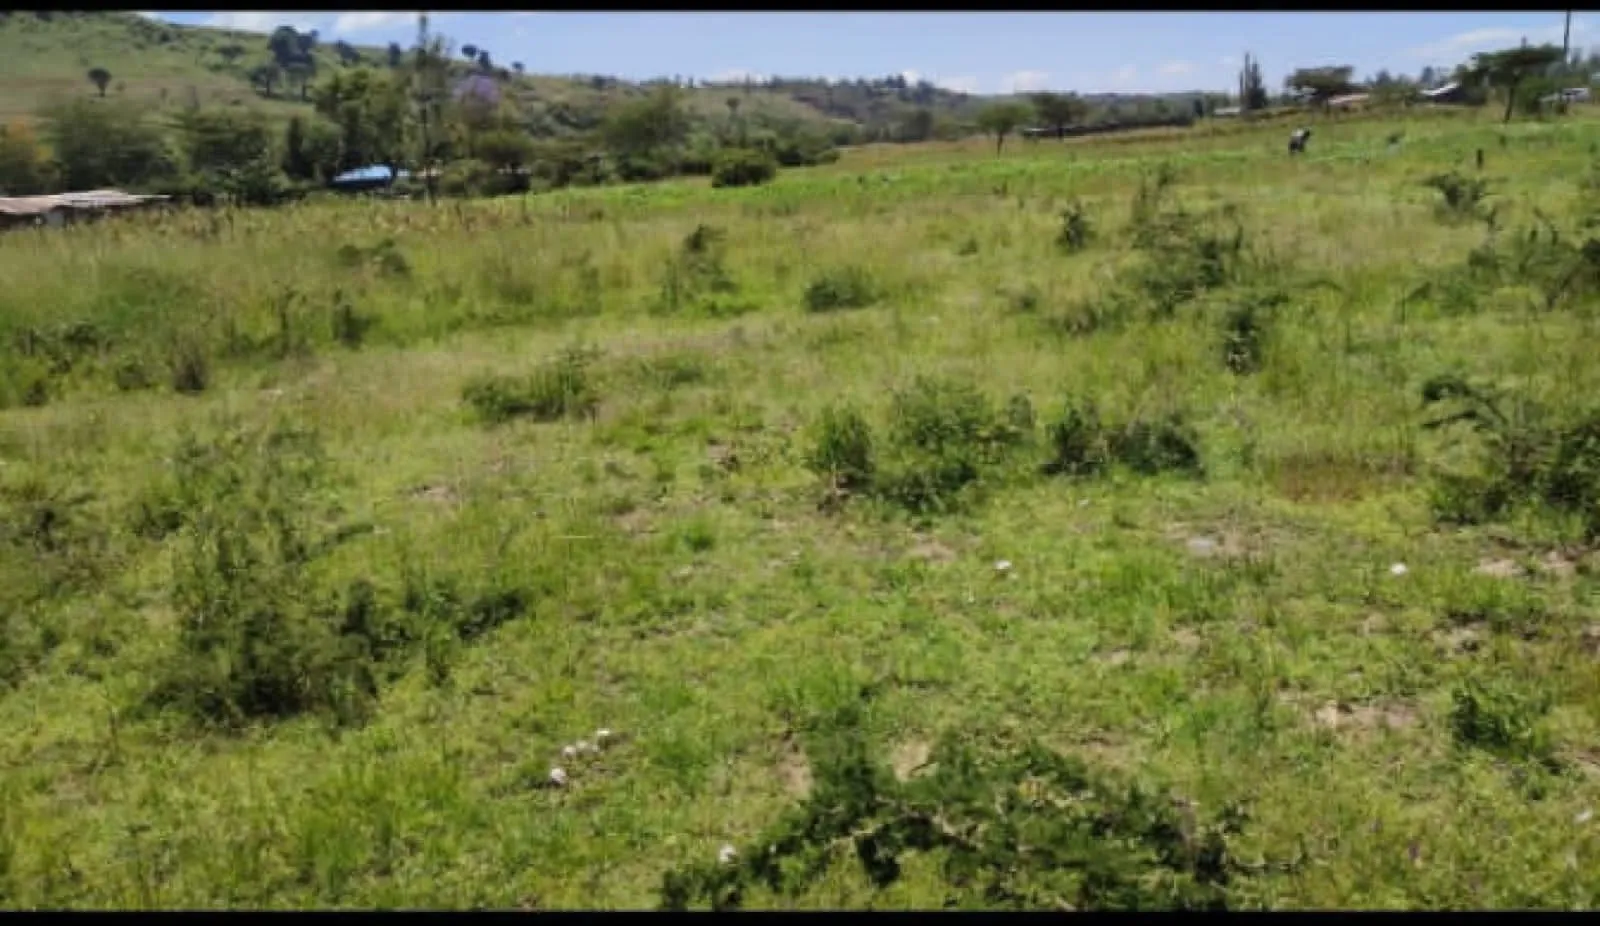 Land For Sale Real Estate-1/4 Acre PCEA Mbaruk NAKURU Clean Tittle Deed Cheapest 2